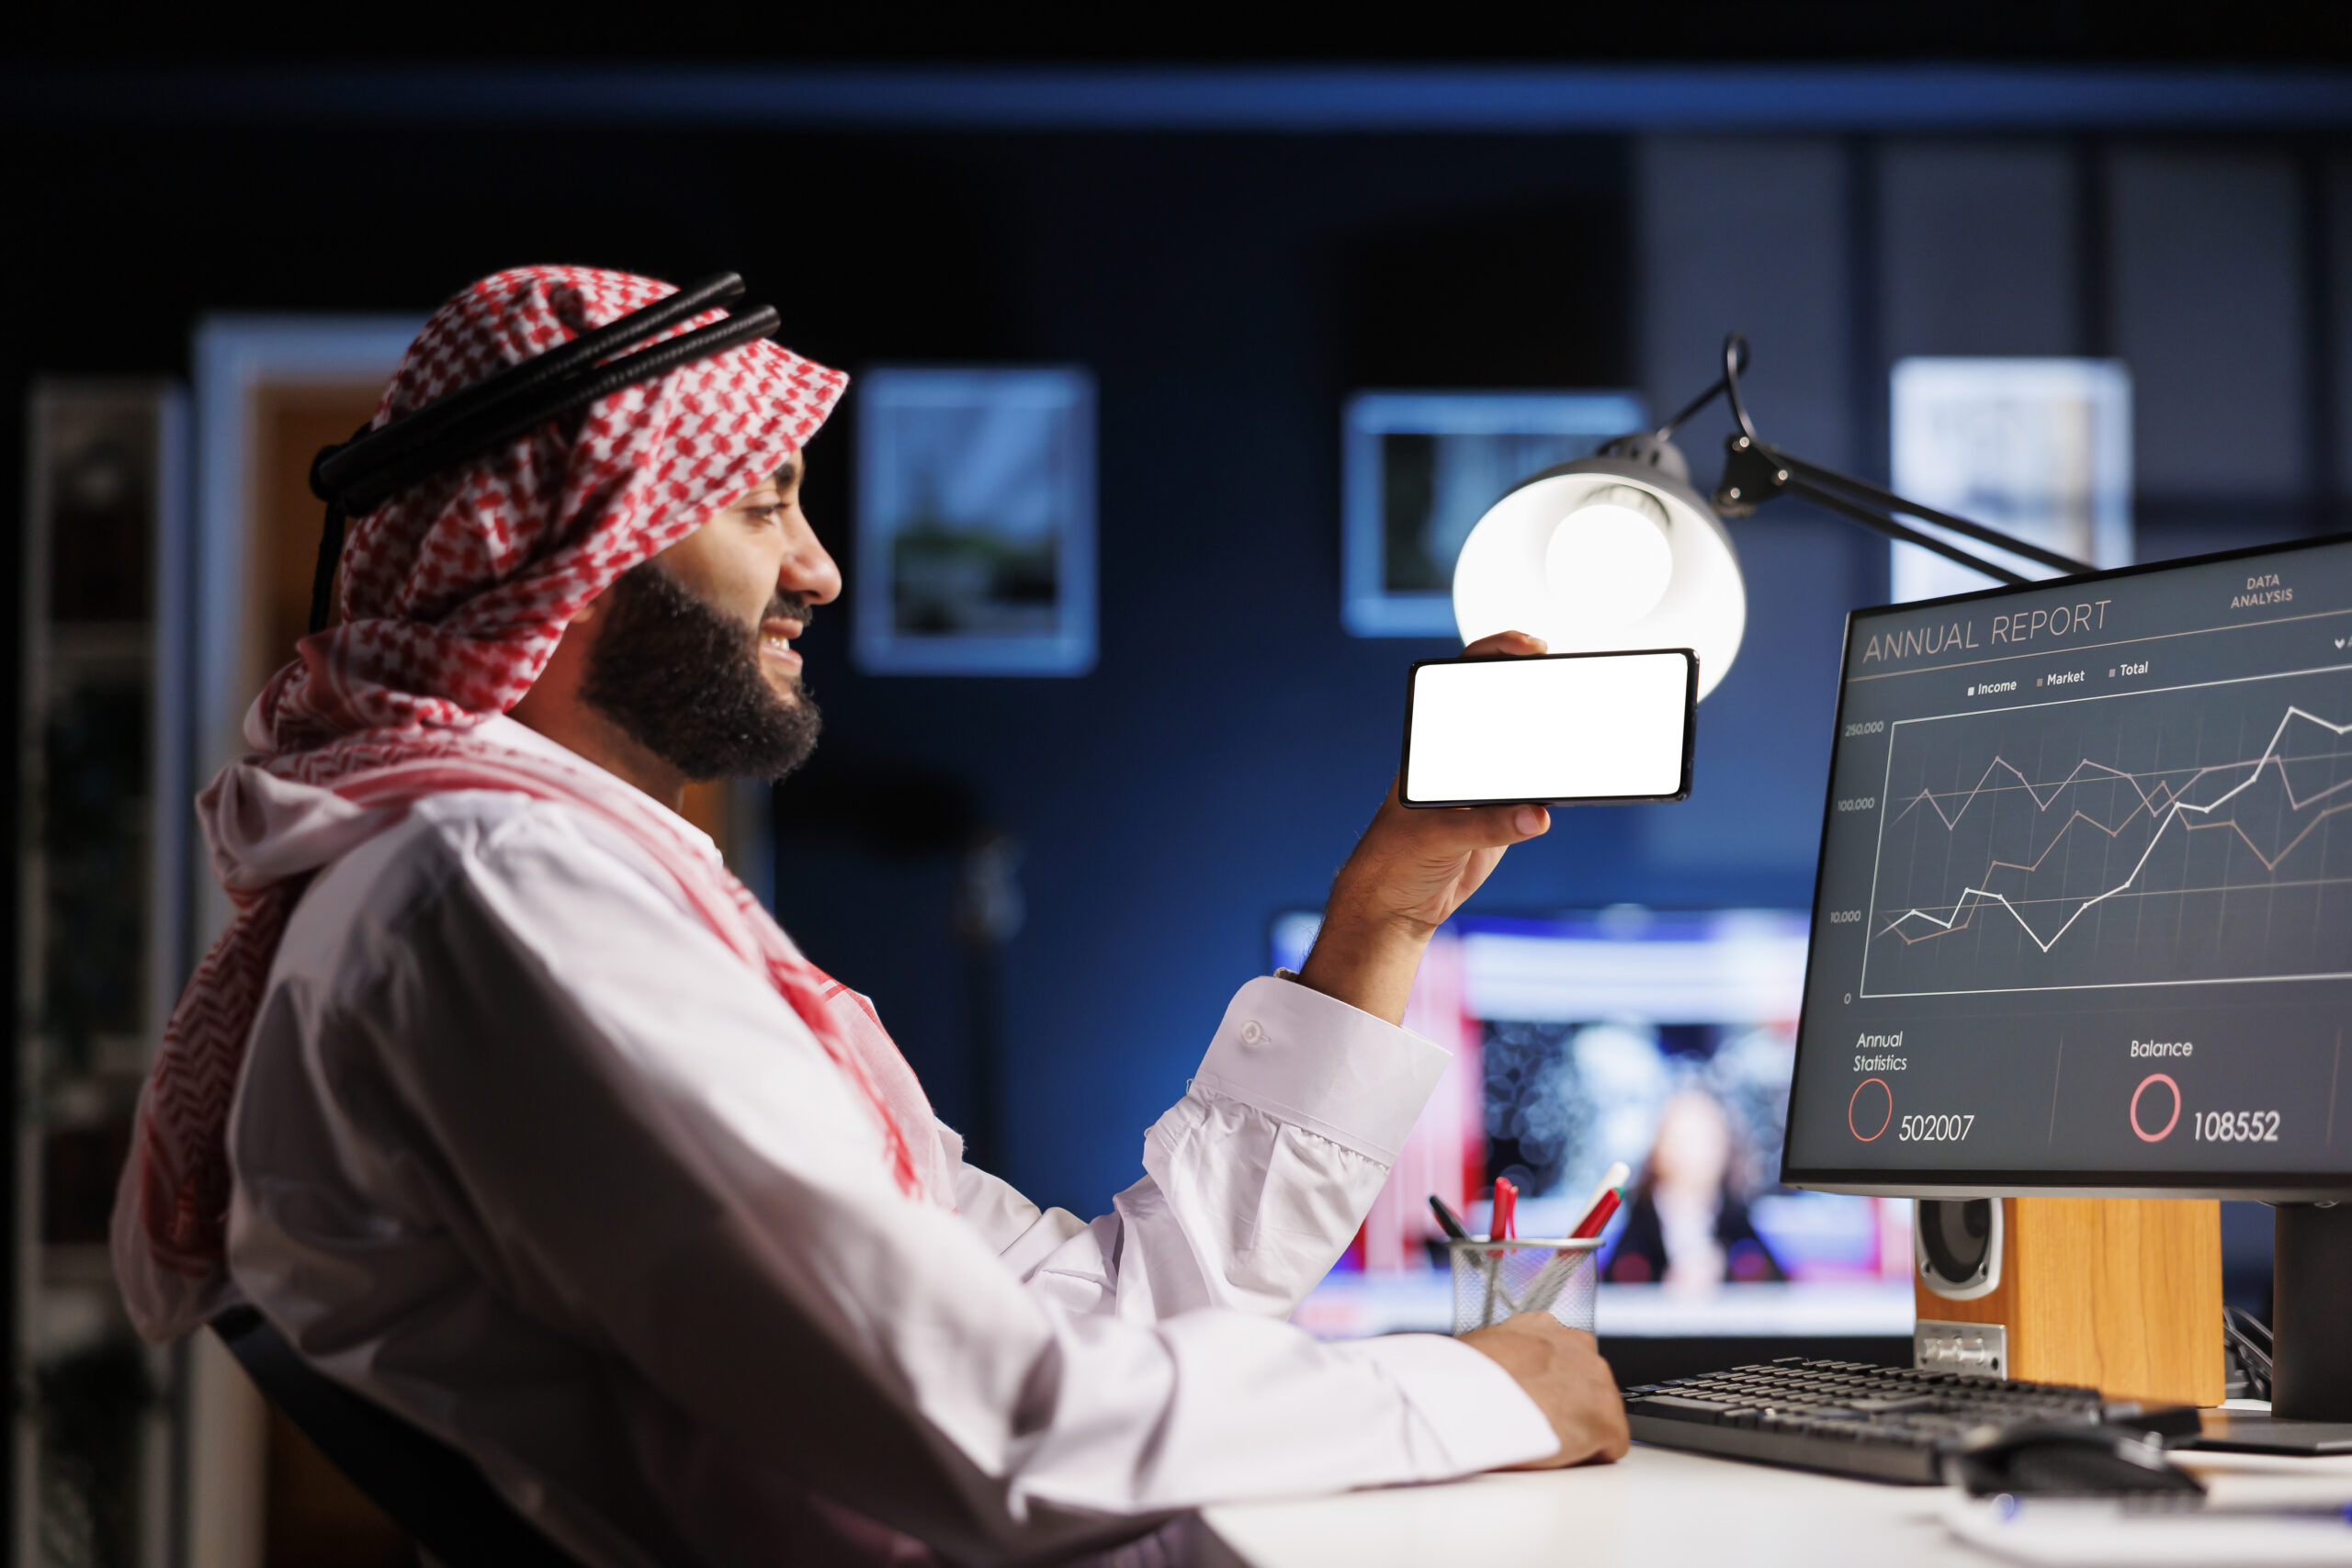 An Arabic individual, wearing traditional clothing uses a mobile phone at an office desk. The isolated white screen offers space for customized content in an advertising or promotional setting.